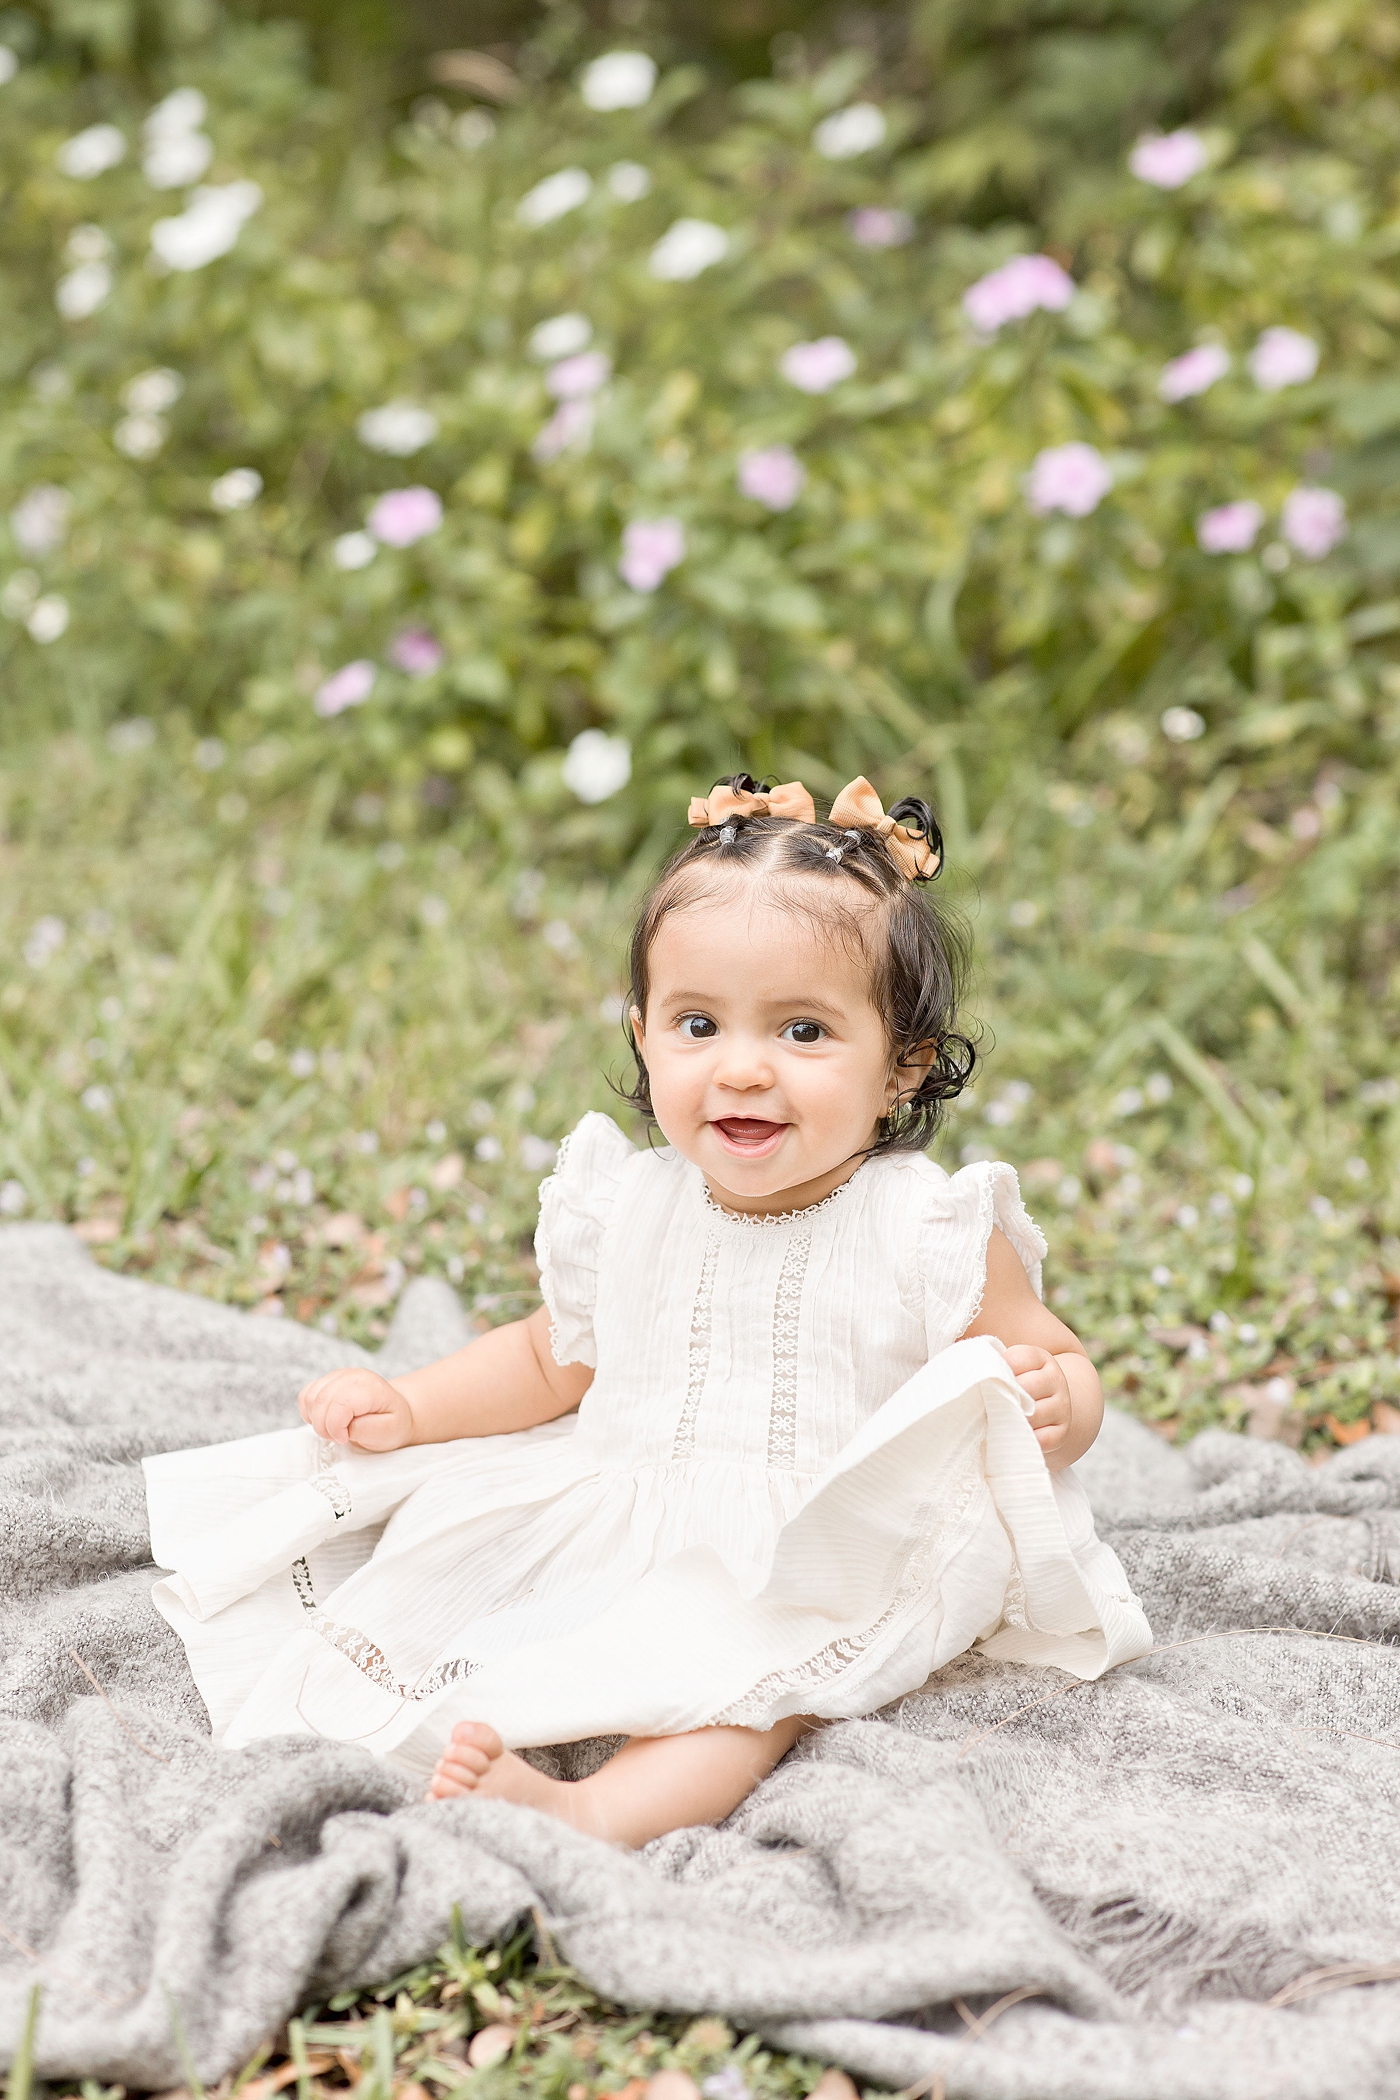 Baby girl smiles while sitting atop a blanket during baby photography miami. Photo by Ivanna Vidal Photography.